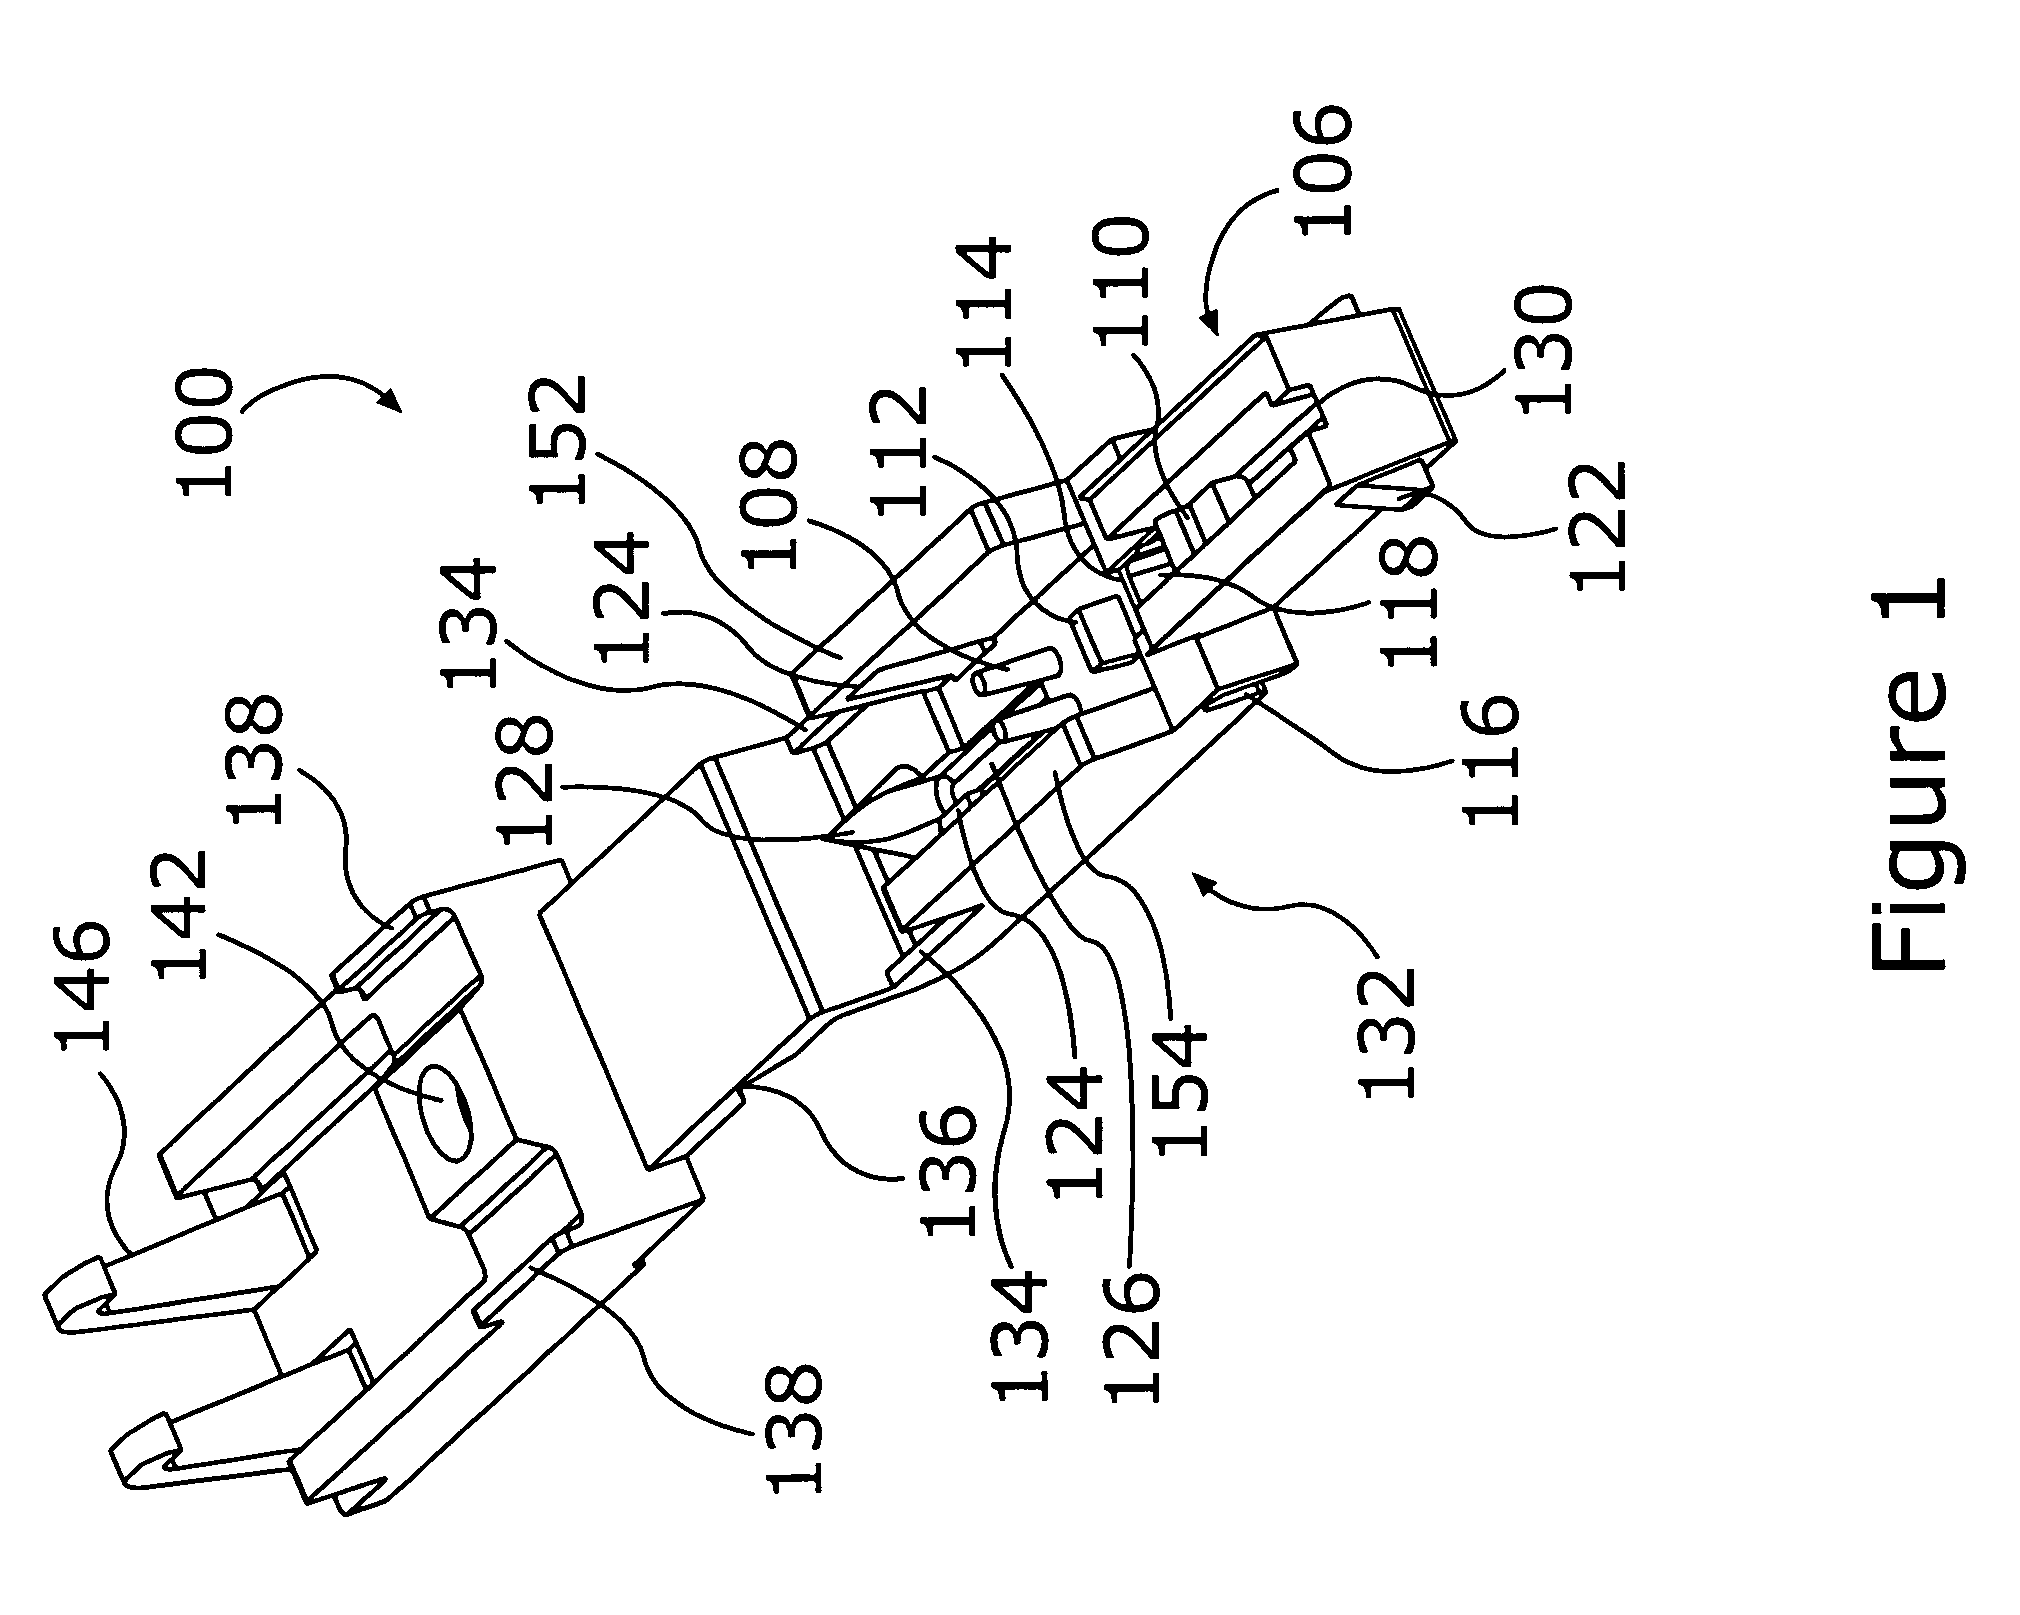 Clip-on device for coupling an electric match to a pyrotechnic fuse